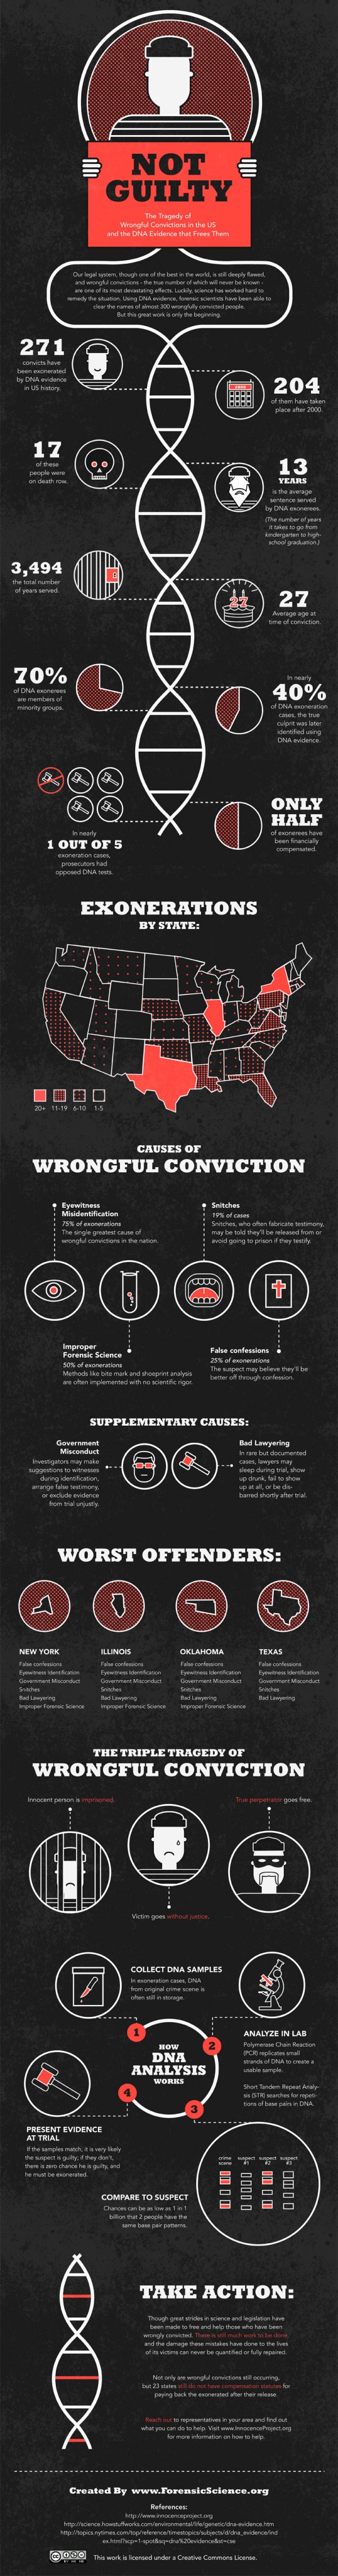 The Imperfections U.S. Judicial System 